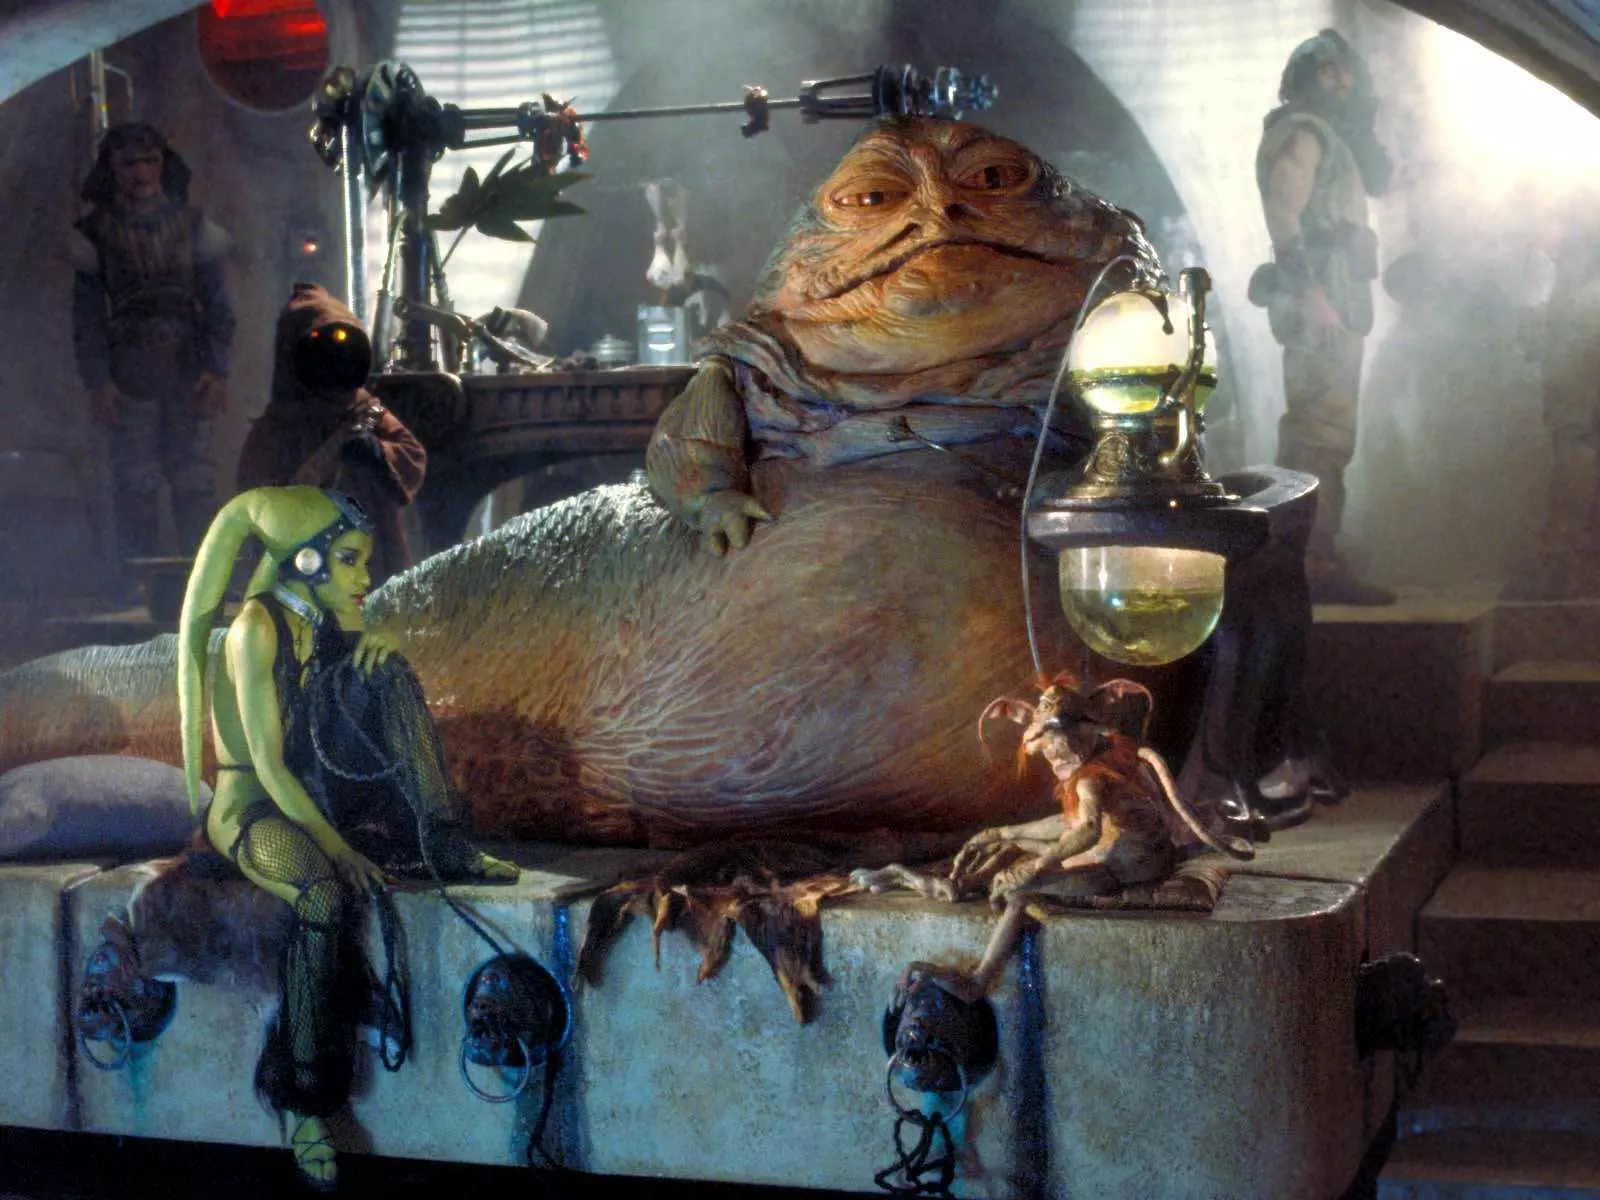 Luke Skywalker meets with Jabba the Hutt, who flaunts his power by exploiting Princess Leia as his slave.